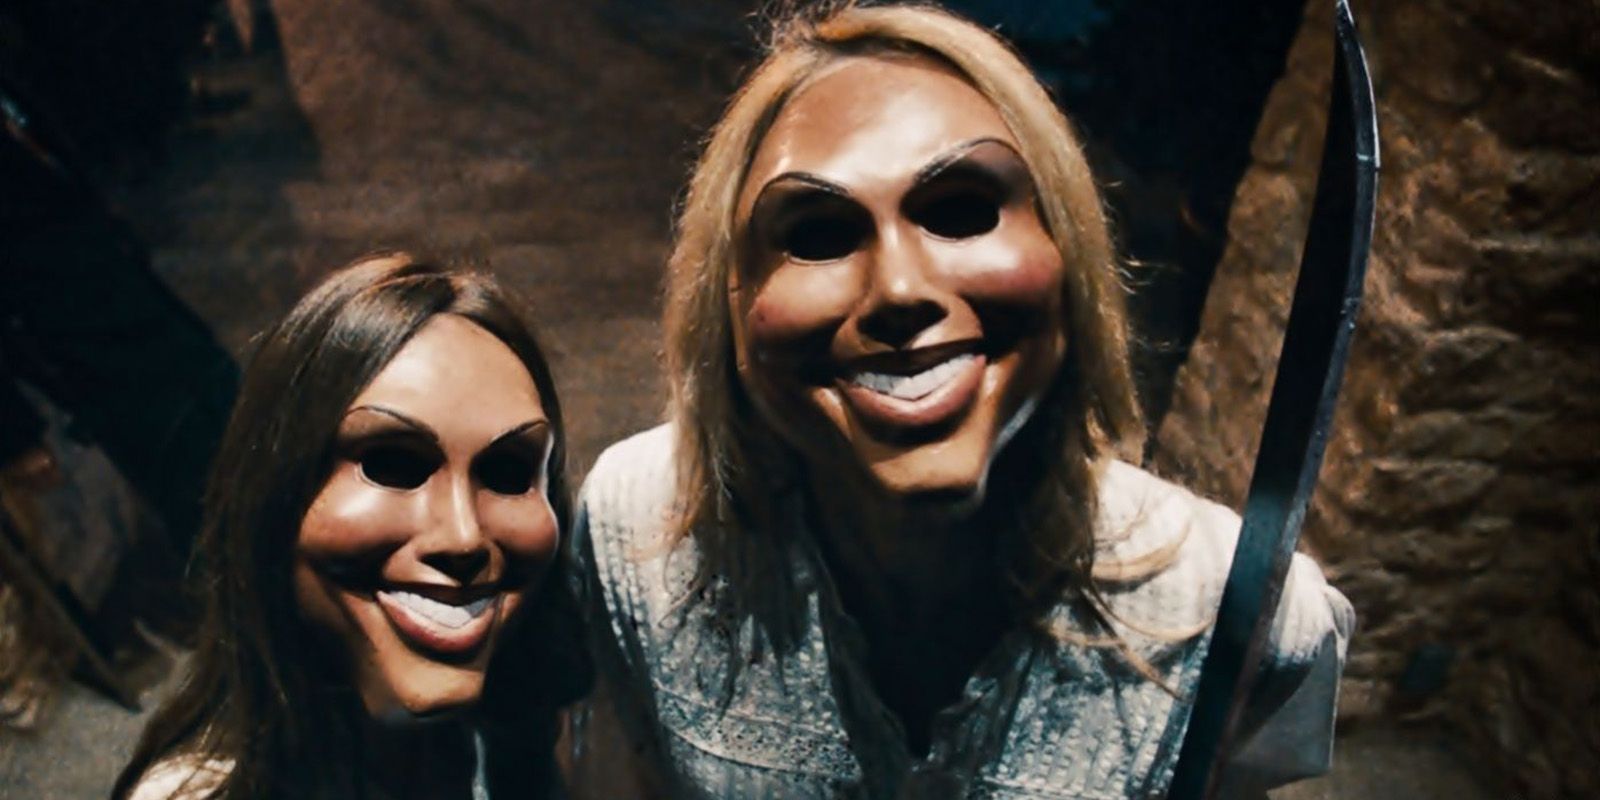 Two of the masked killers from The Purge, standing outside a house